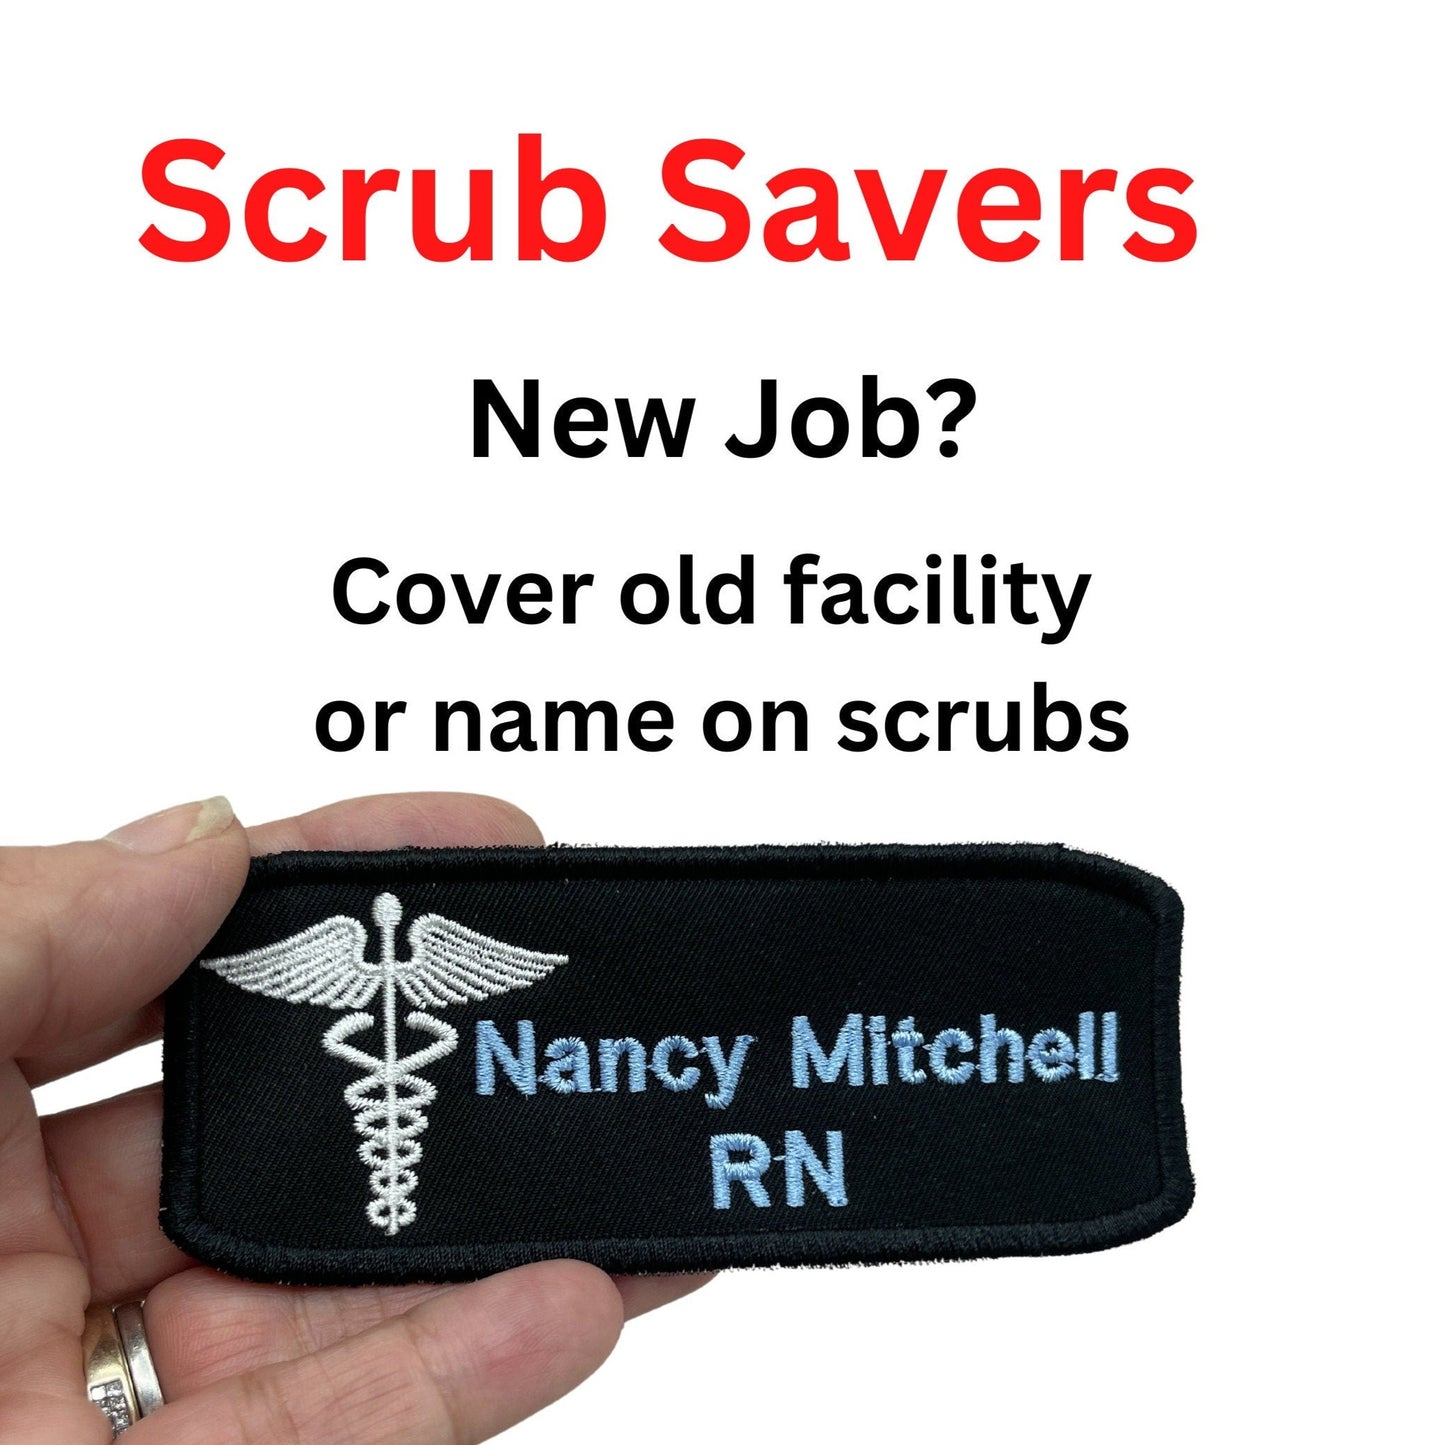 Scrub savers embroidered medical patches for healthcare worker